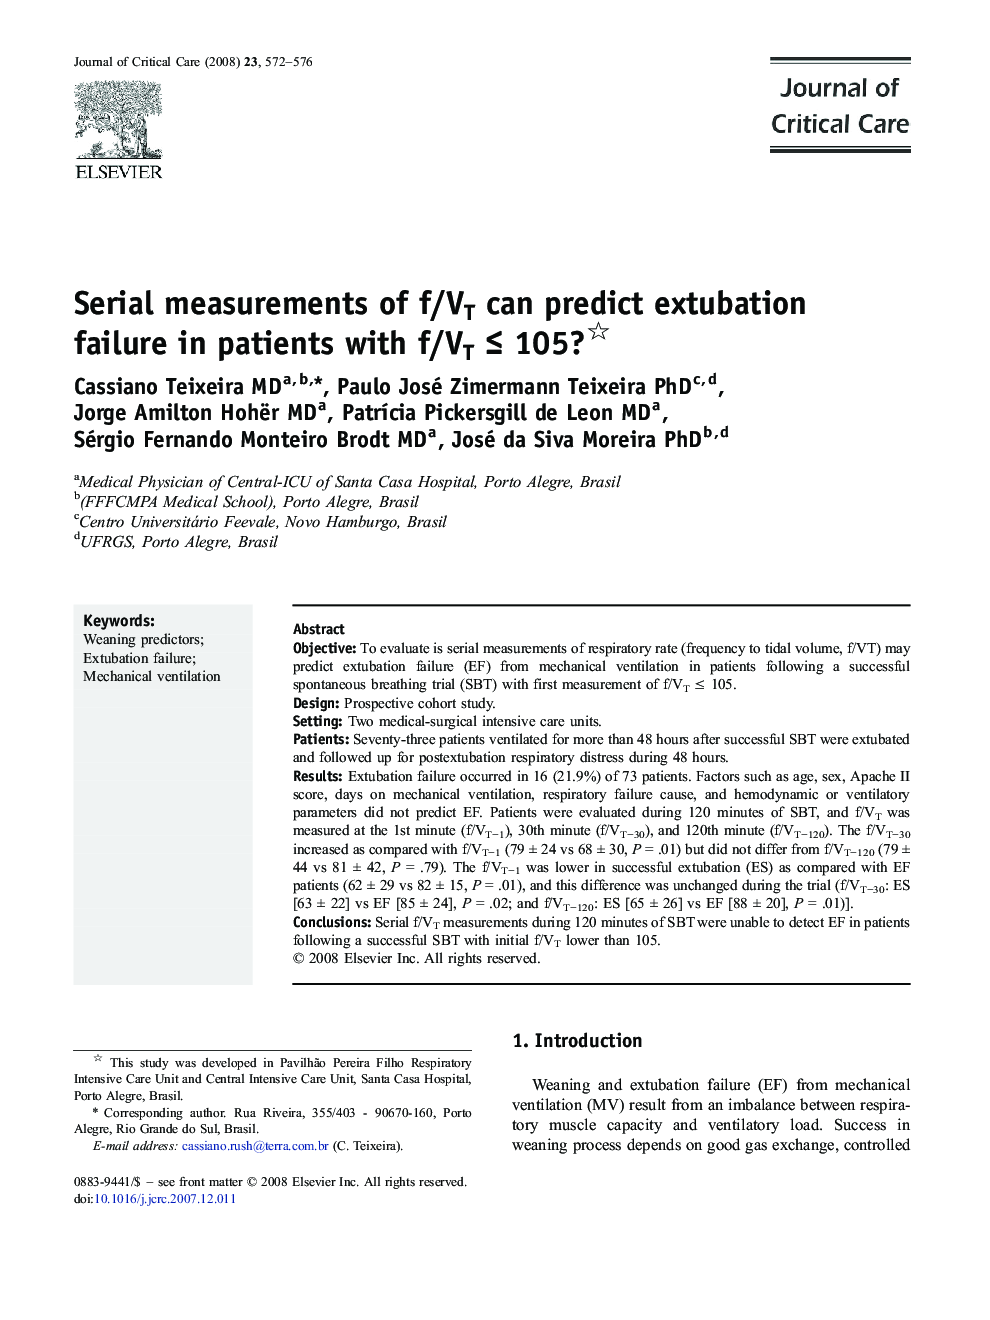 Serial measurements of f/VT can predict extubation failure in patients with f/VT ≤ 105? 